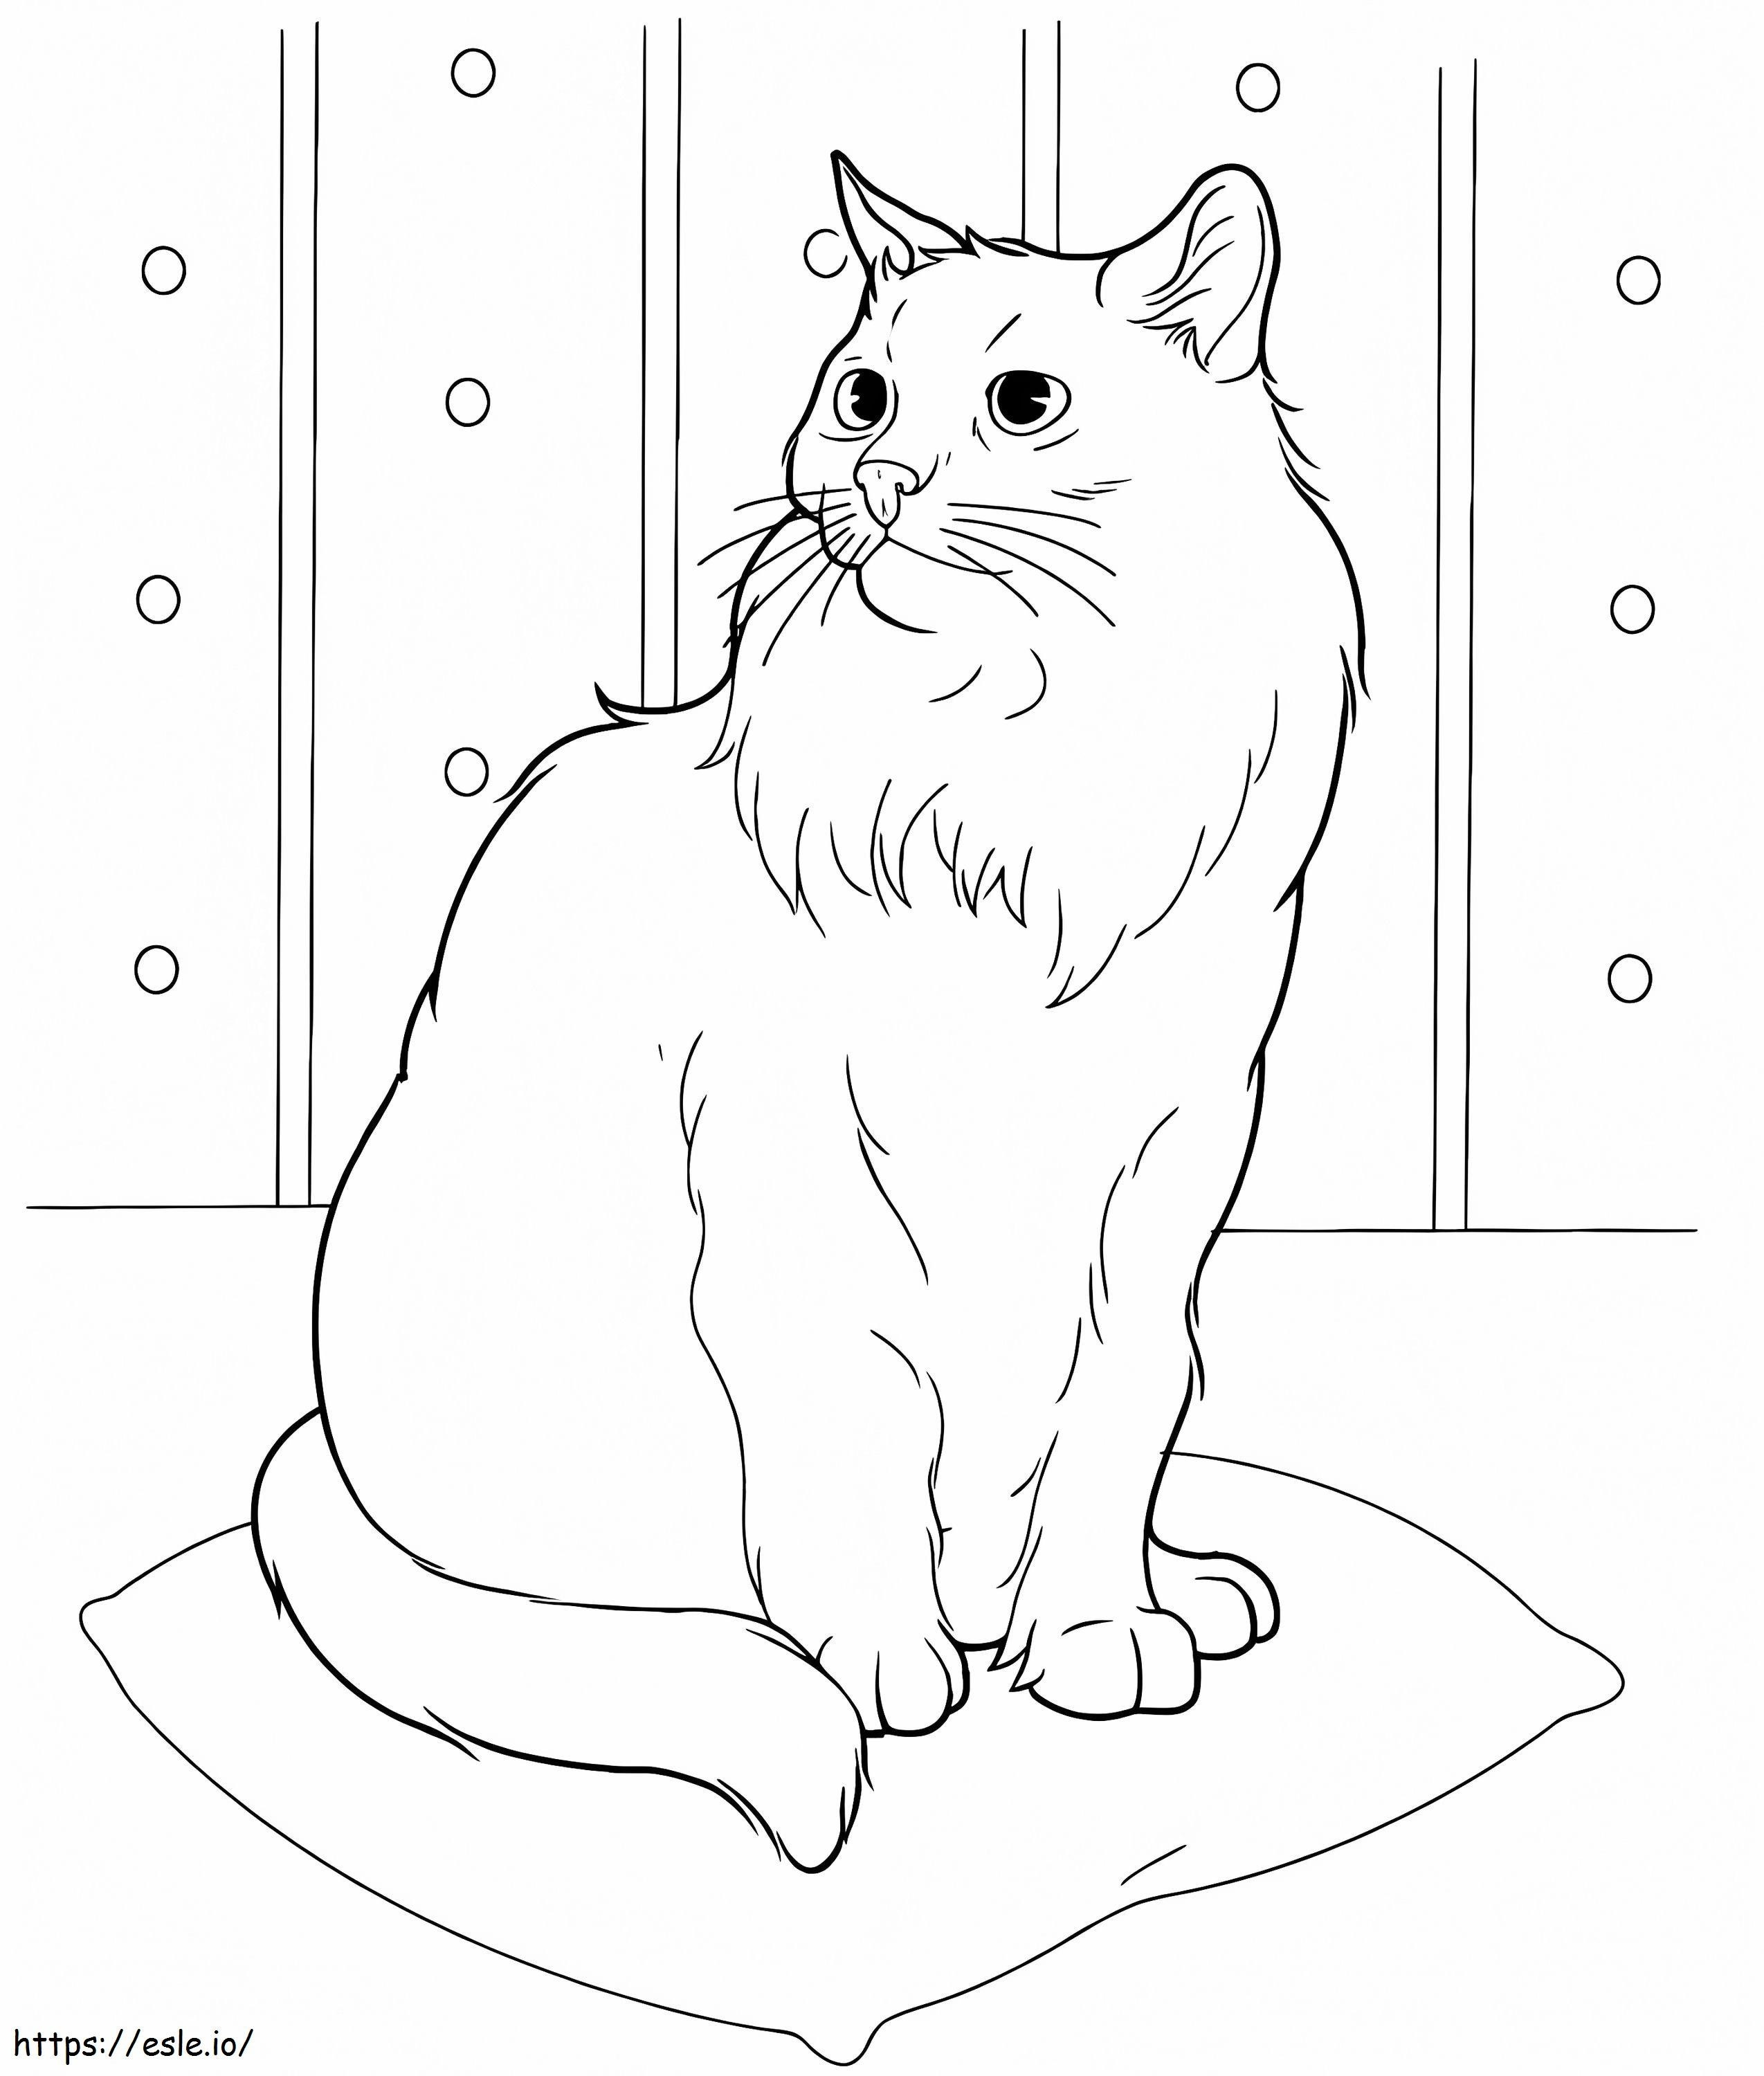 Siberian Cat 1 coloring page